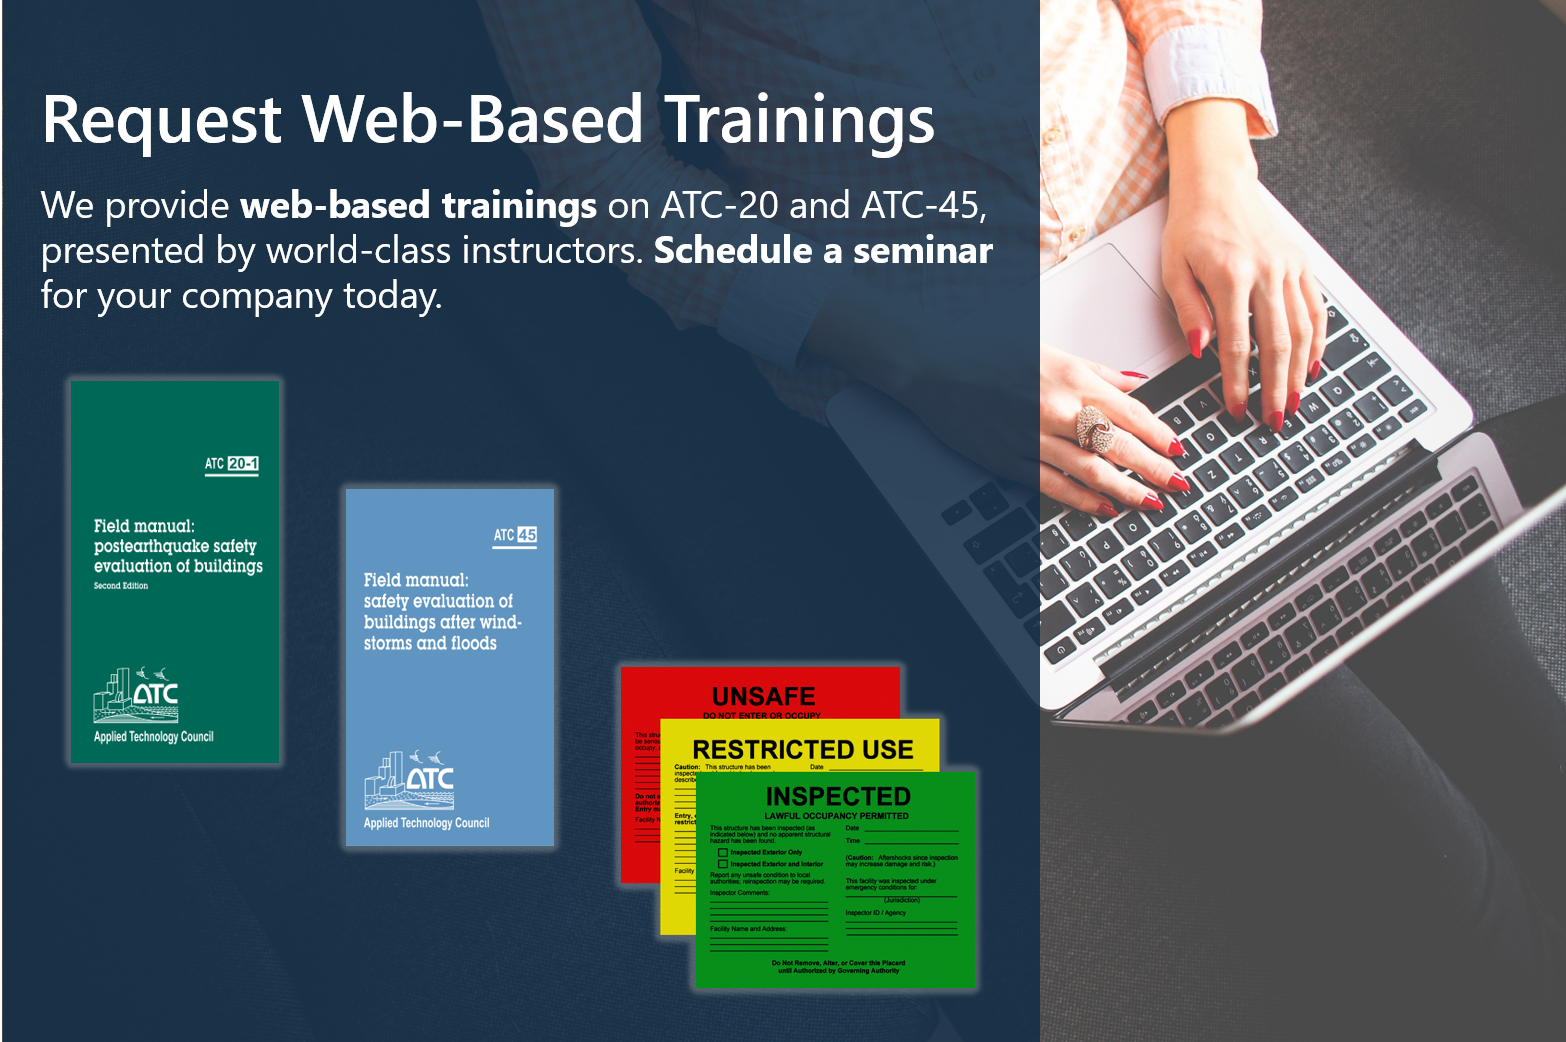 Request Web-Based Trainings